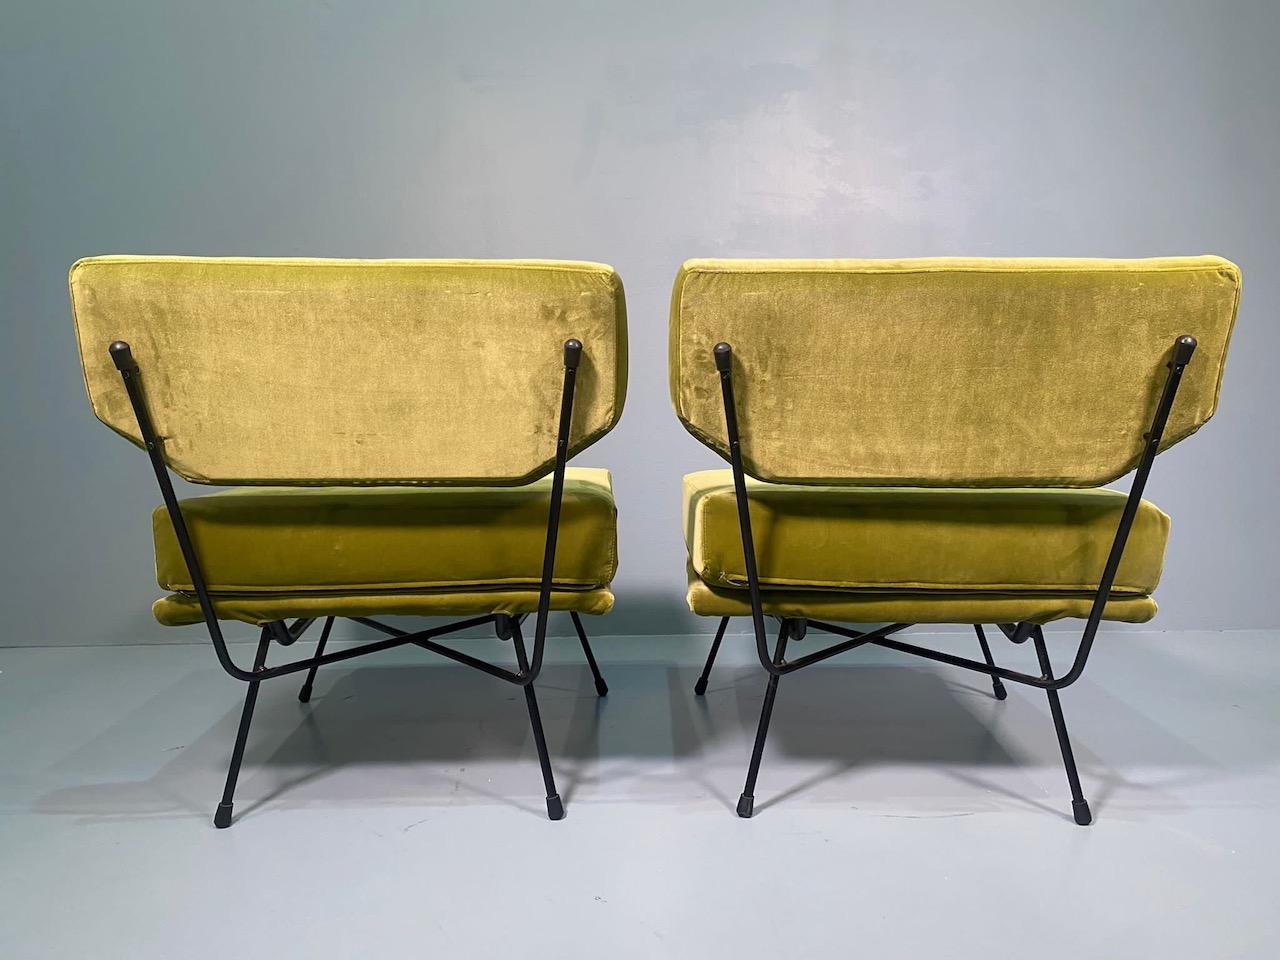 Italian Pair of 'Elettra' Lounge Chairs by BBPR, Arflex, Italy 1953, Compasso D'Oro 1954 For Sale